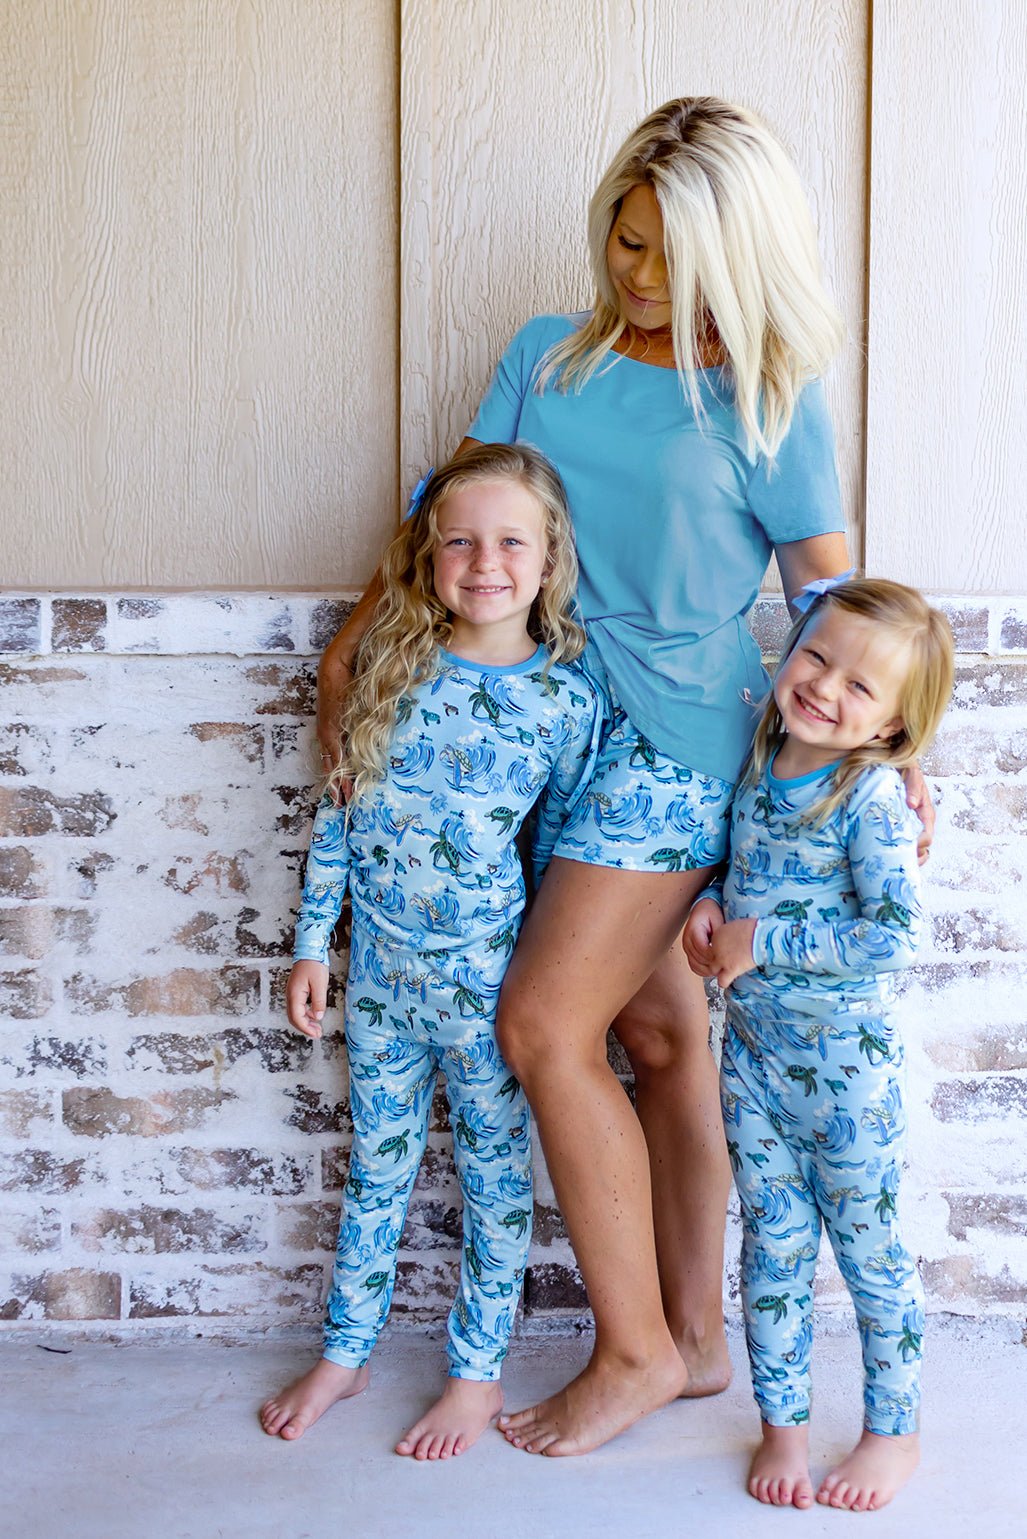 Go with the Flow Sea Turtles Women's Short Sleeve & Shorts Pajama Set